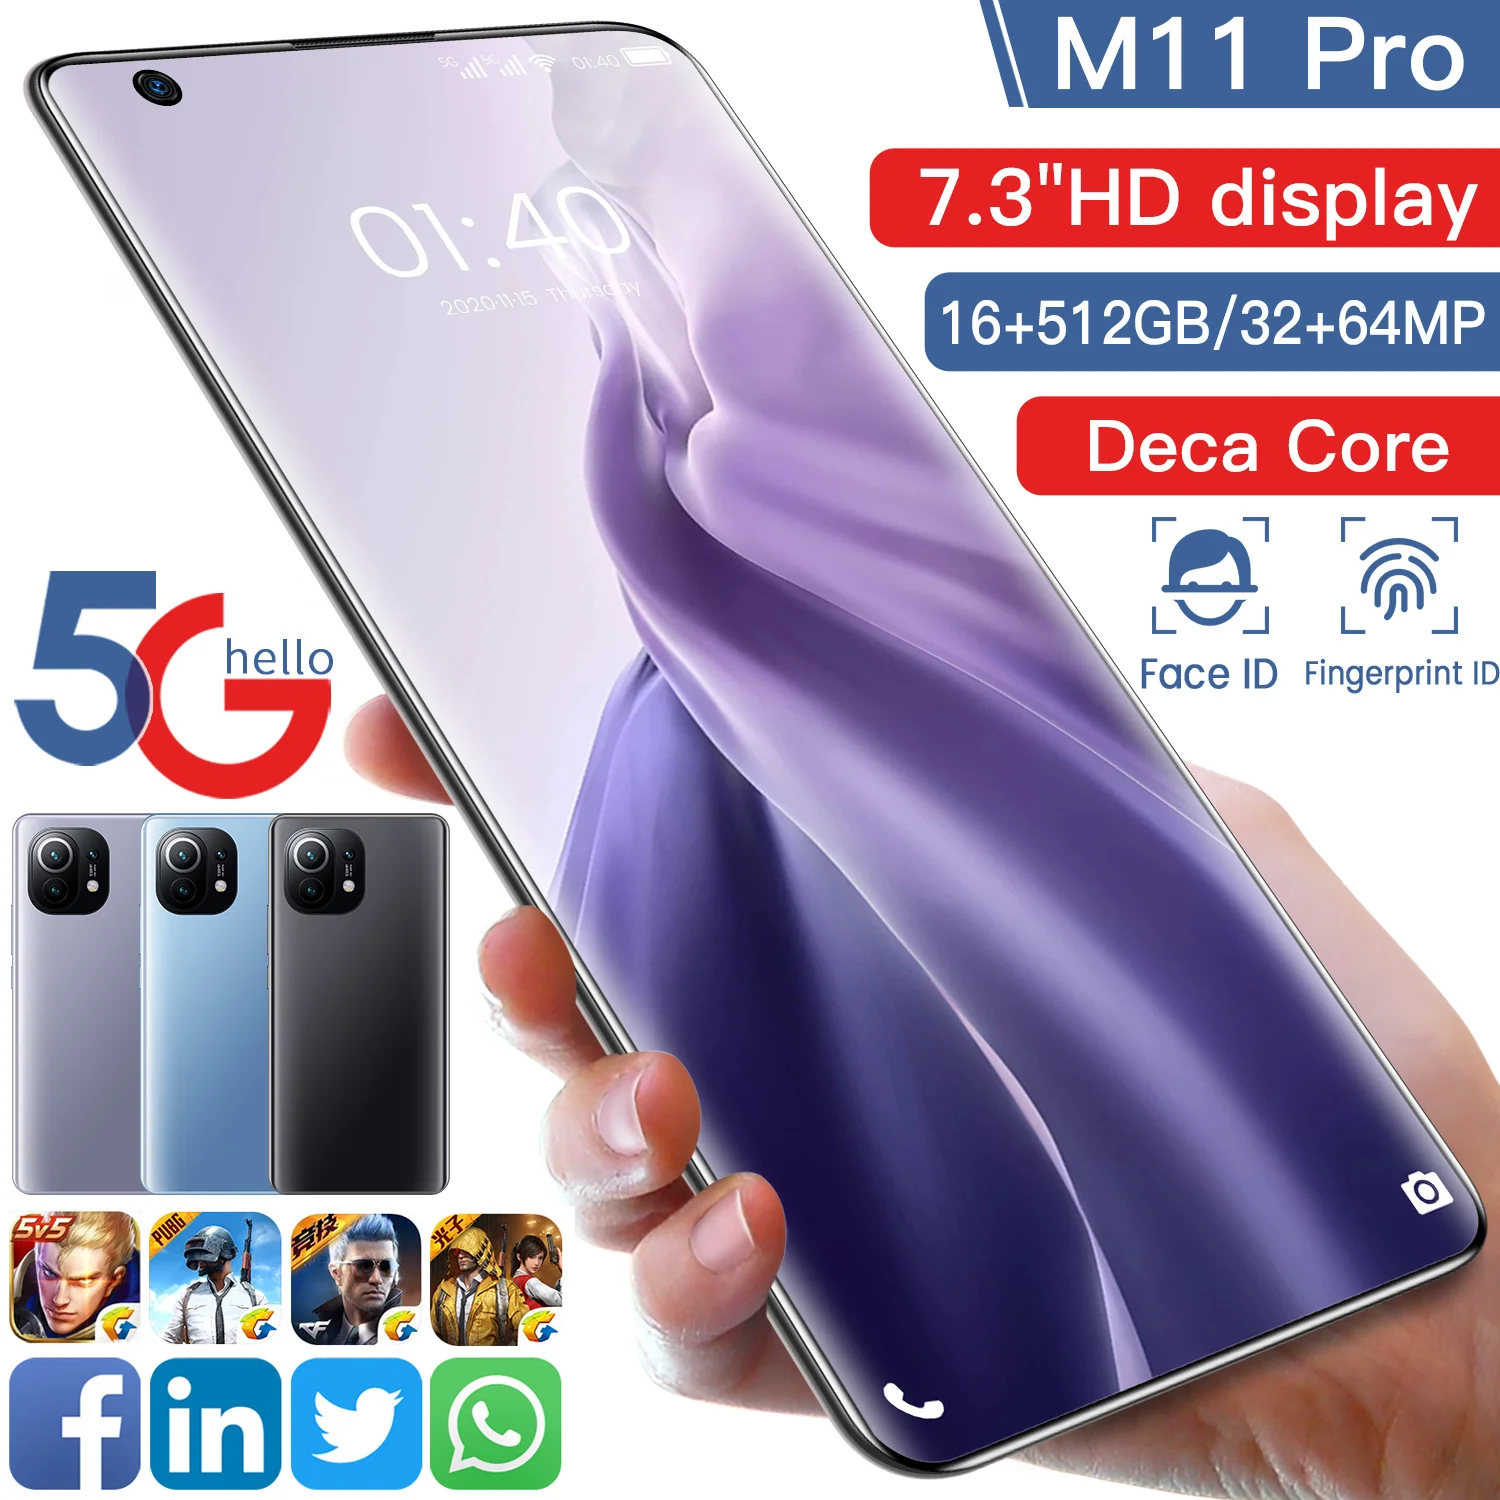 

M11 Pro 16GB+512GB 7.3 Inch Supports Smart Wake-up Face Recognition Screen Fingerprint Dual SIM Card 5G Smartphone Mobile Phone, Black/blue/purple